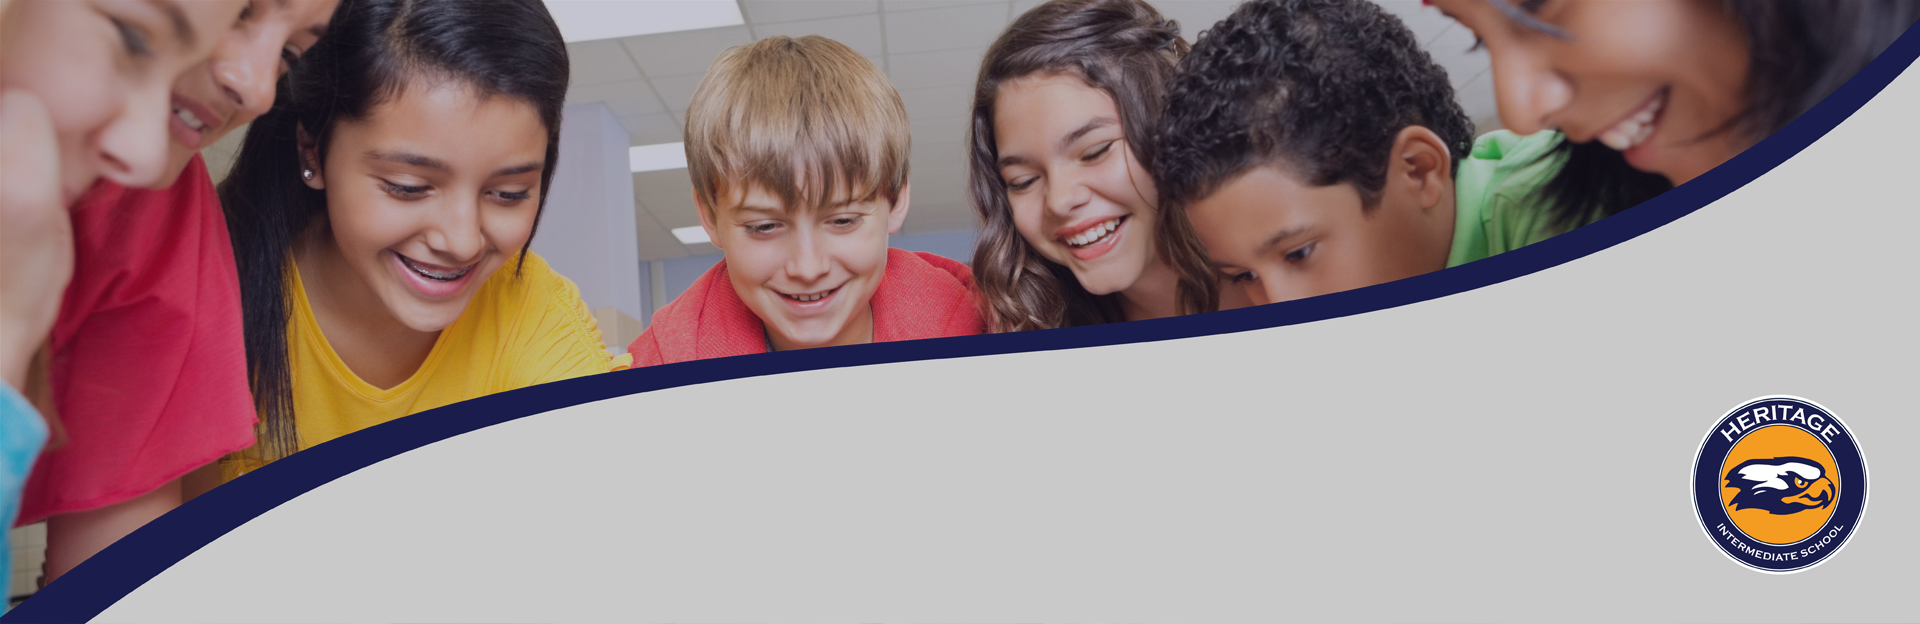 Students smiling and school logo